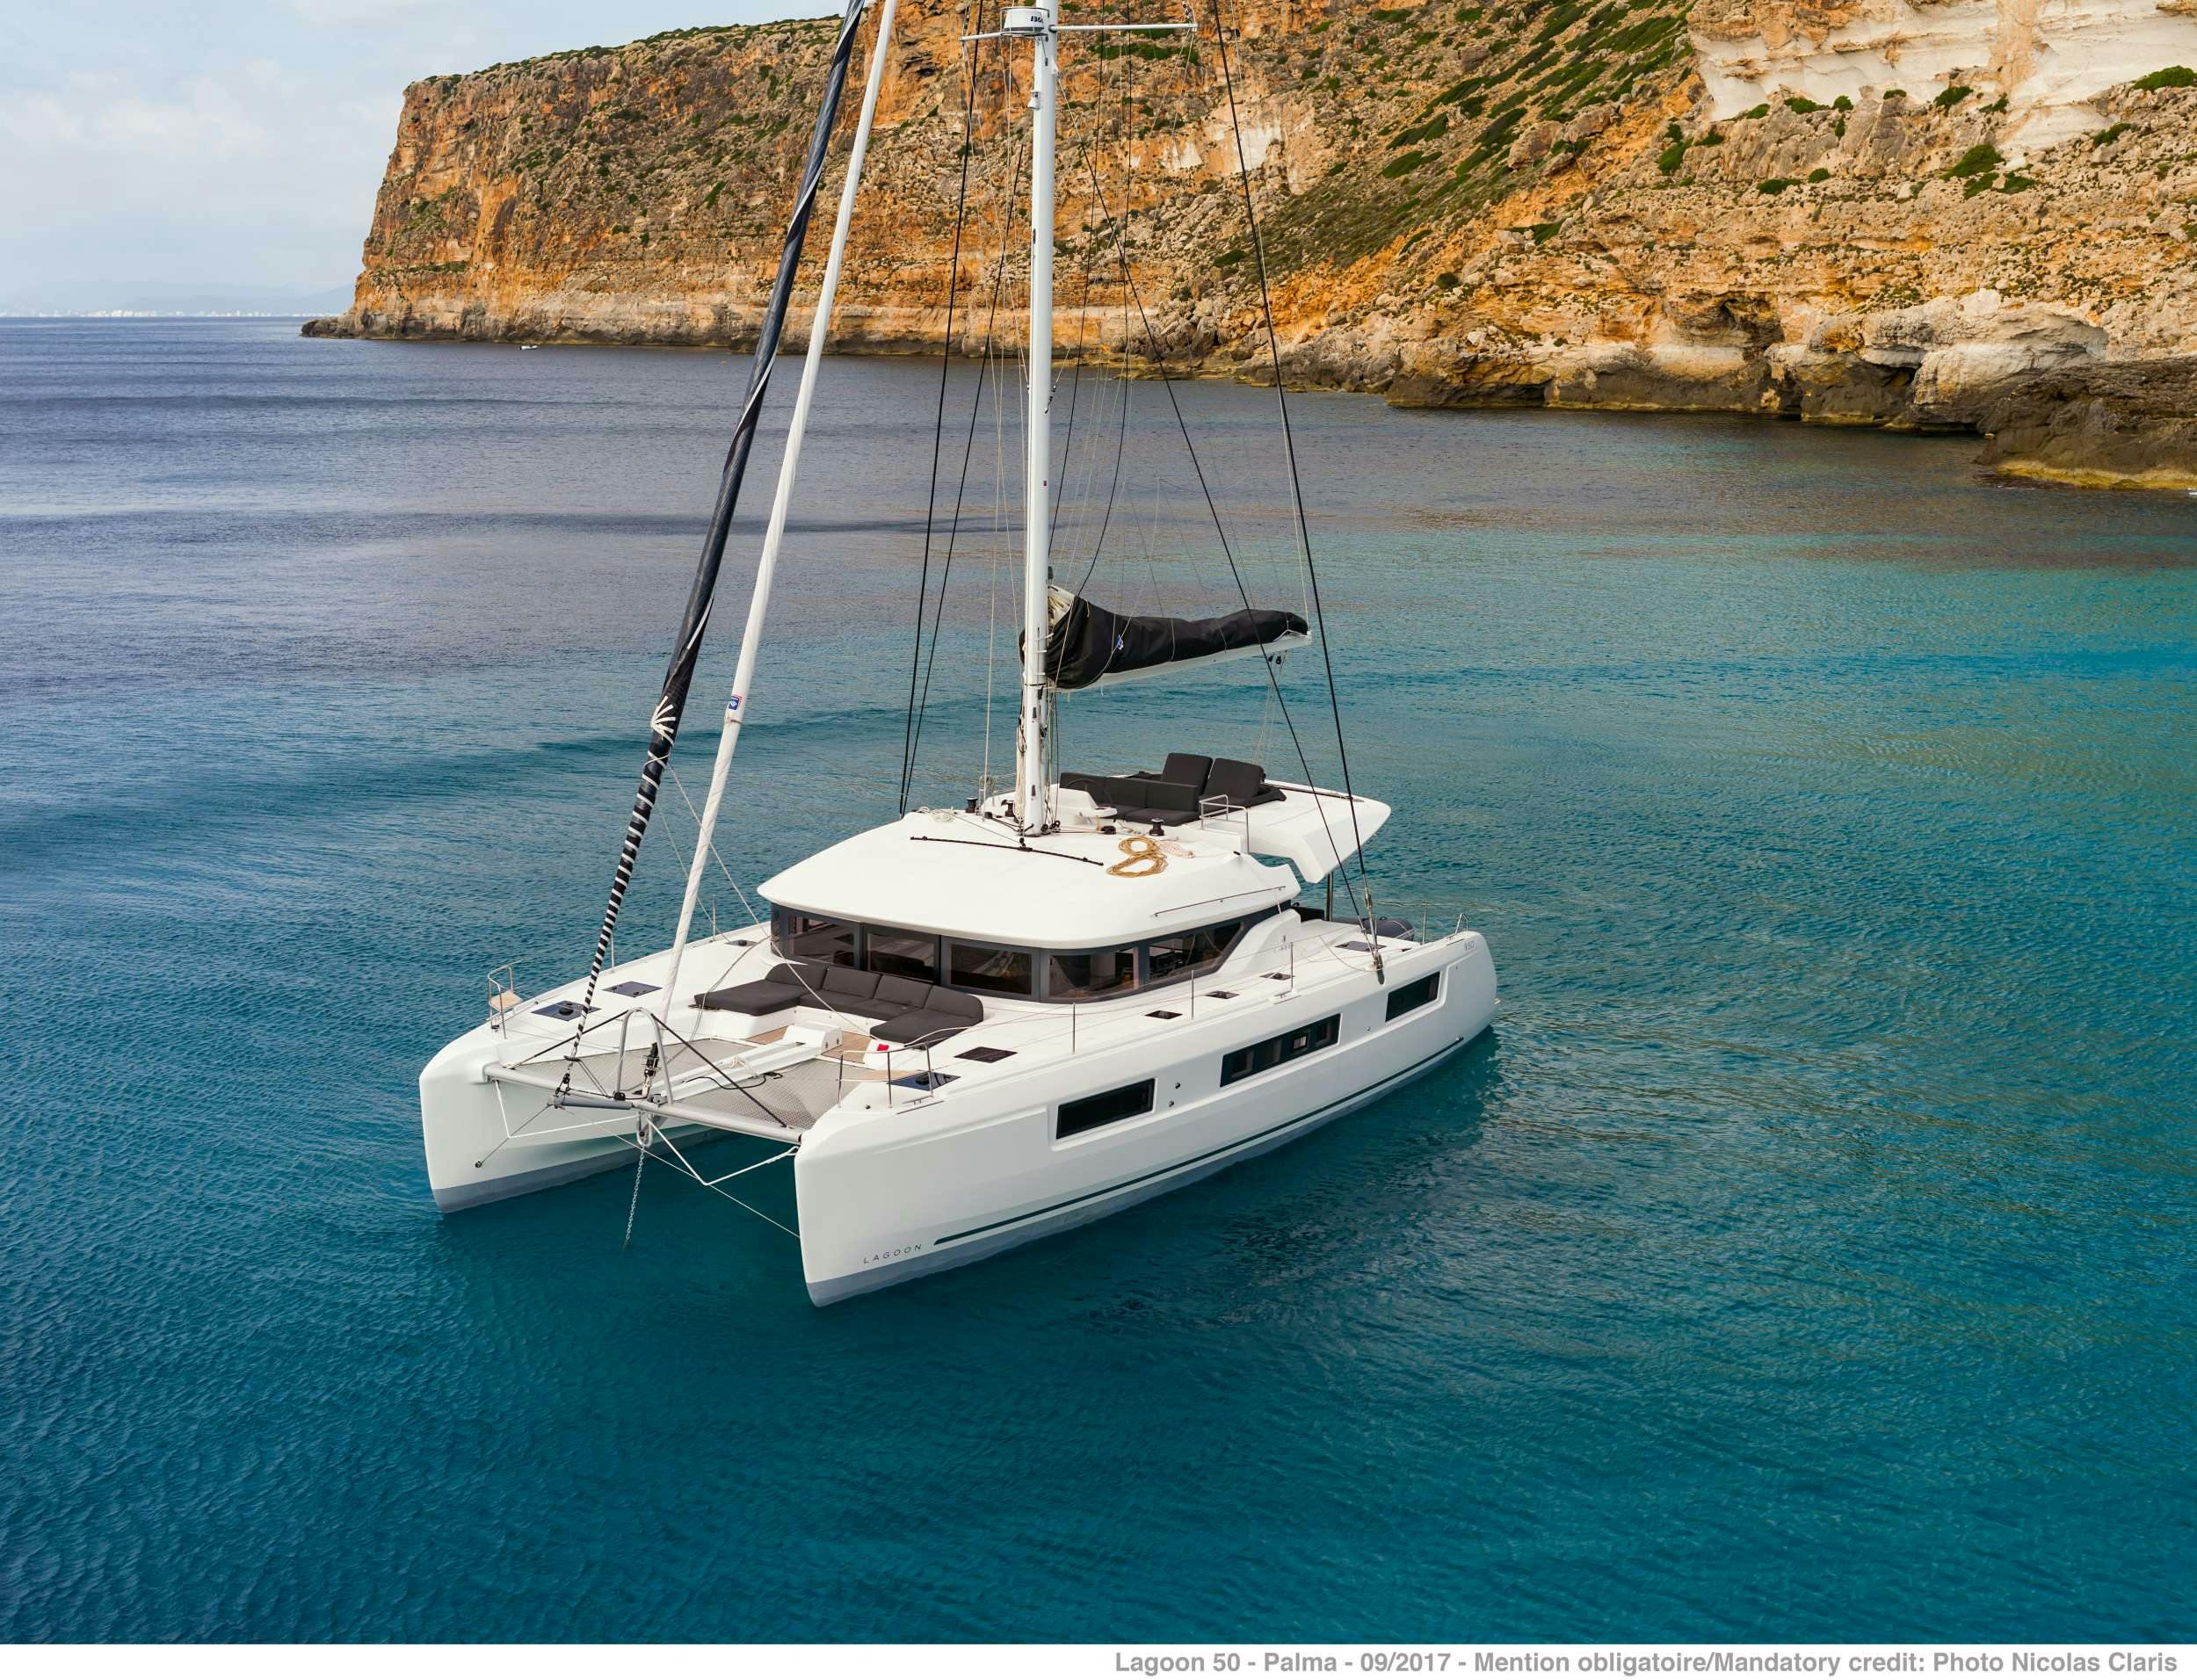 ONEIDA 2 - Catamaran Charter Saint Vincent and the Grenadines & Boat hire in Greece 1